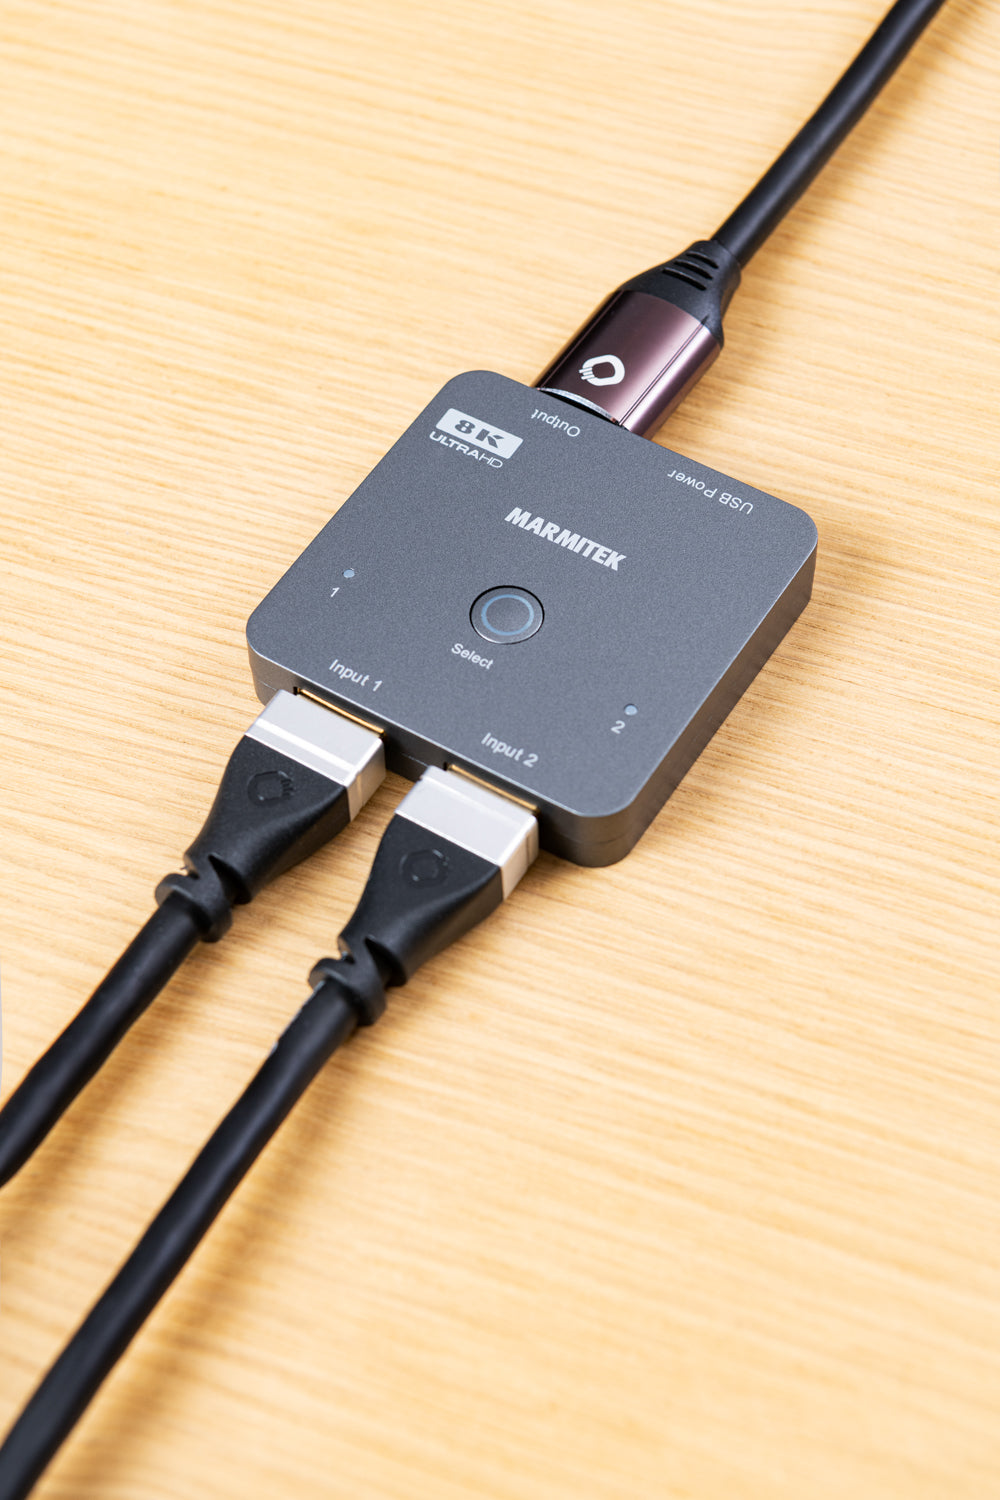 HDMI switch with HDMI cables in INPUT and OUTPUT